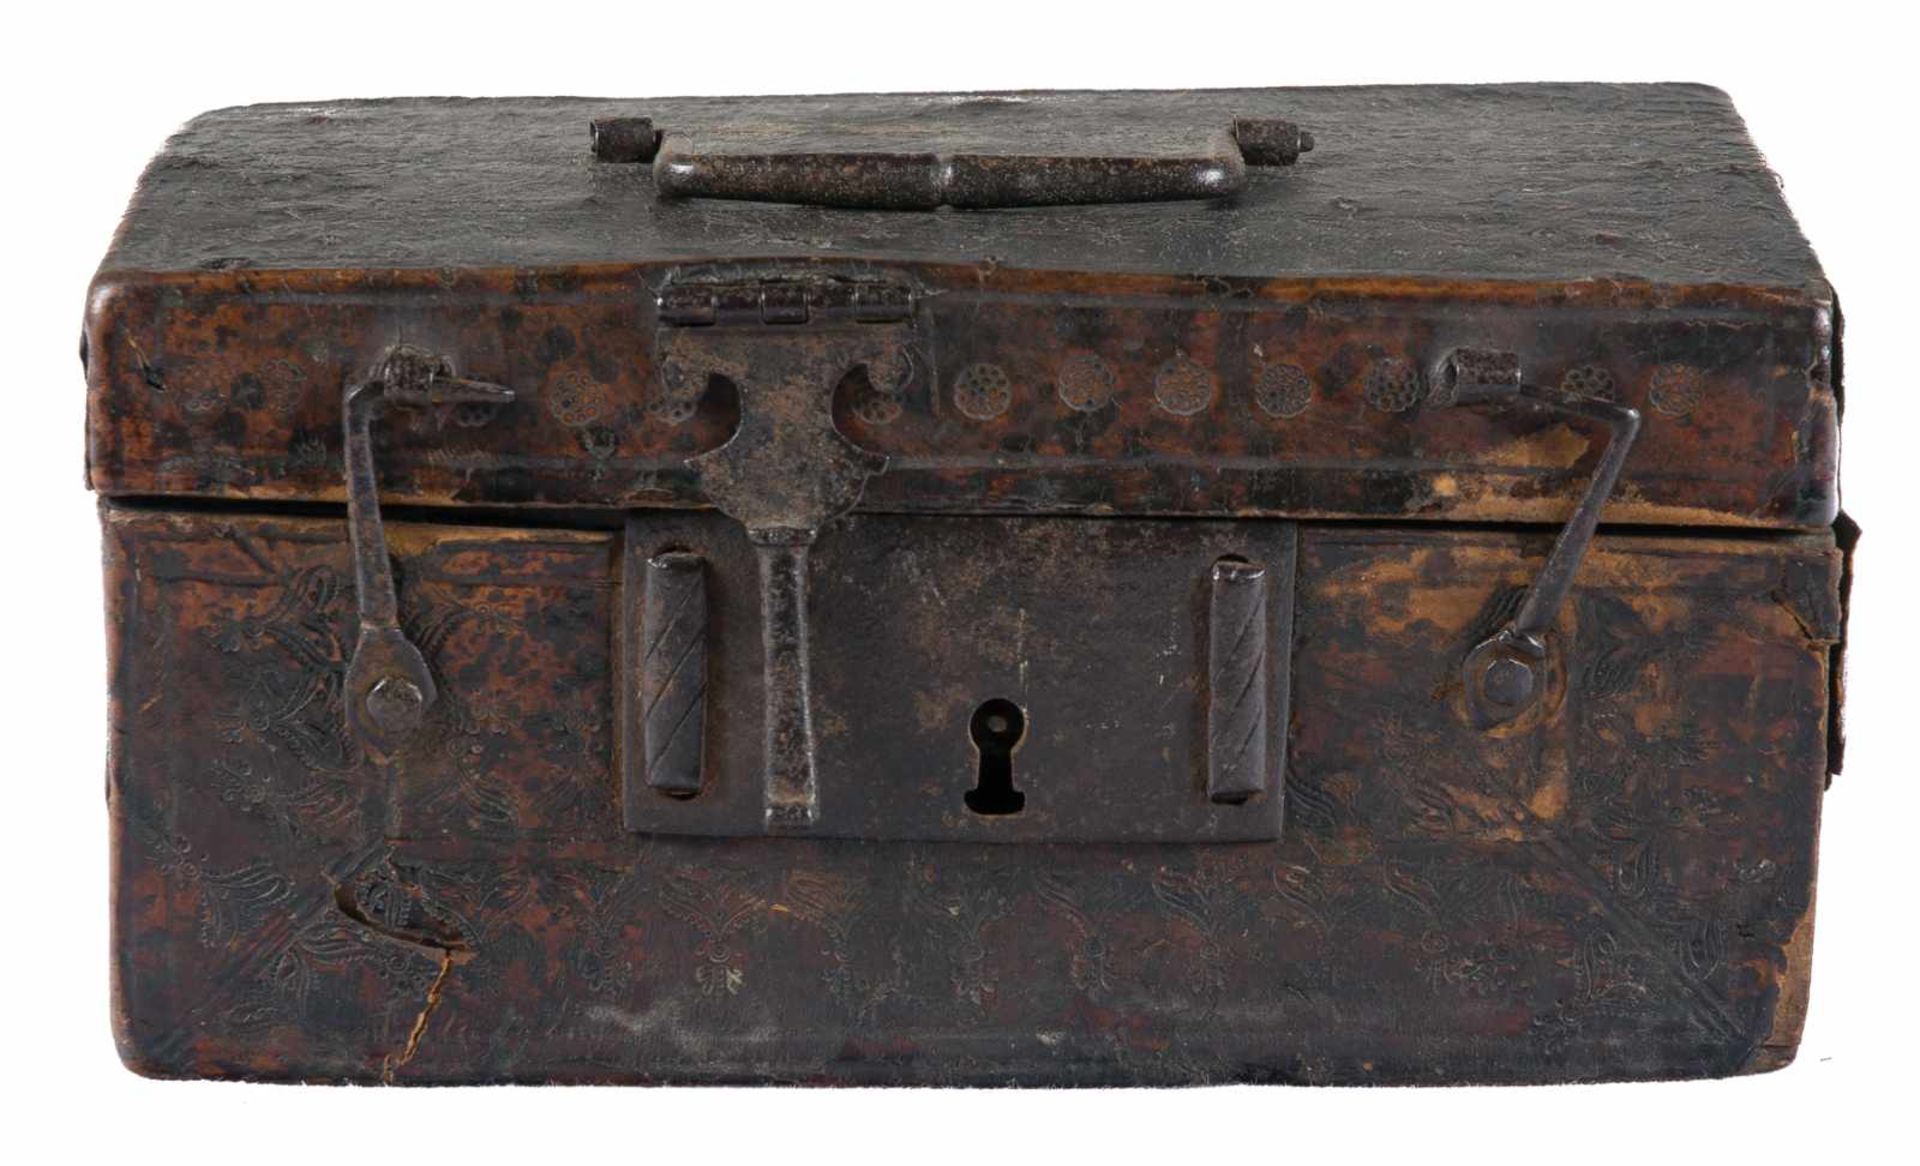 Engraved cordovan leather chest with iron fittings and wooden base. 15th century. ↵↵Flaws. 9 x 18 - Bild 2 aus 5